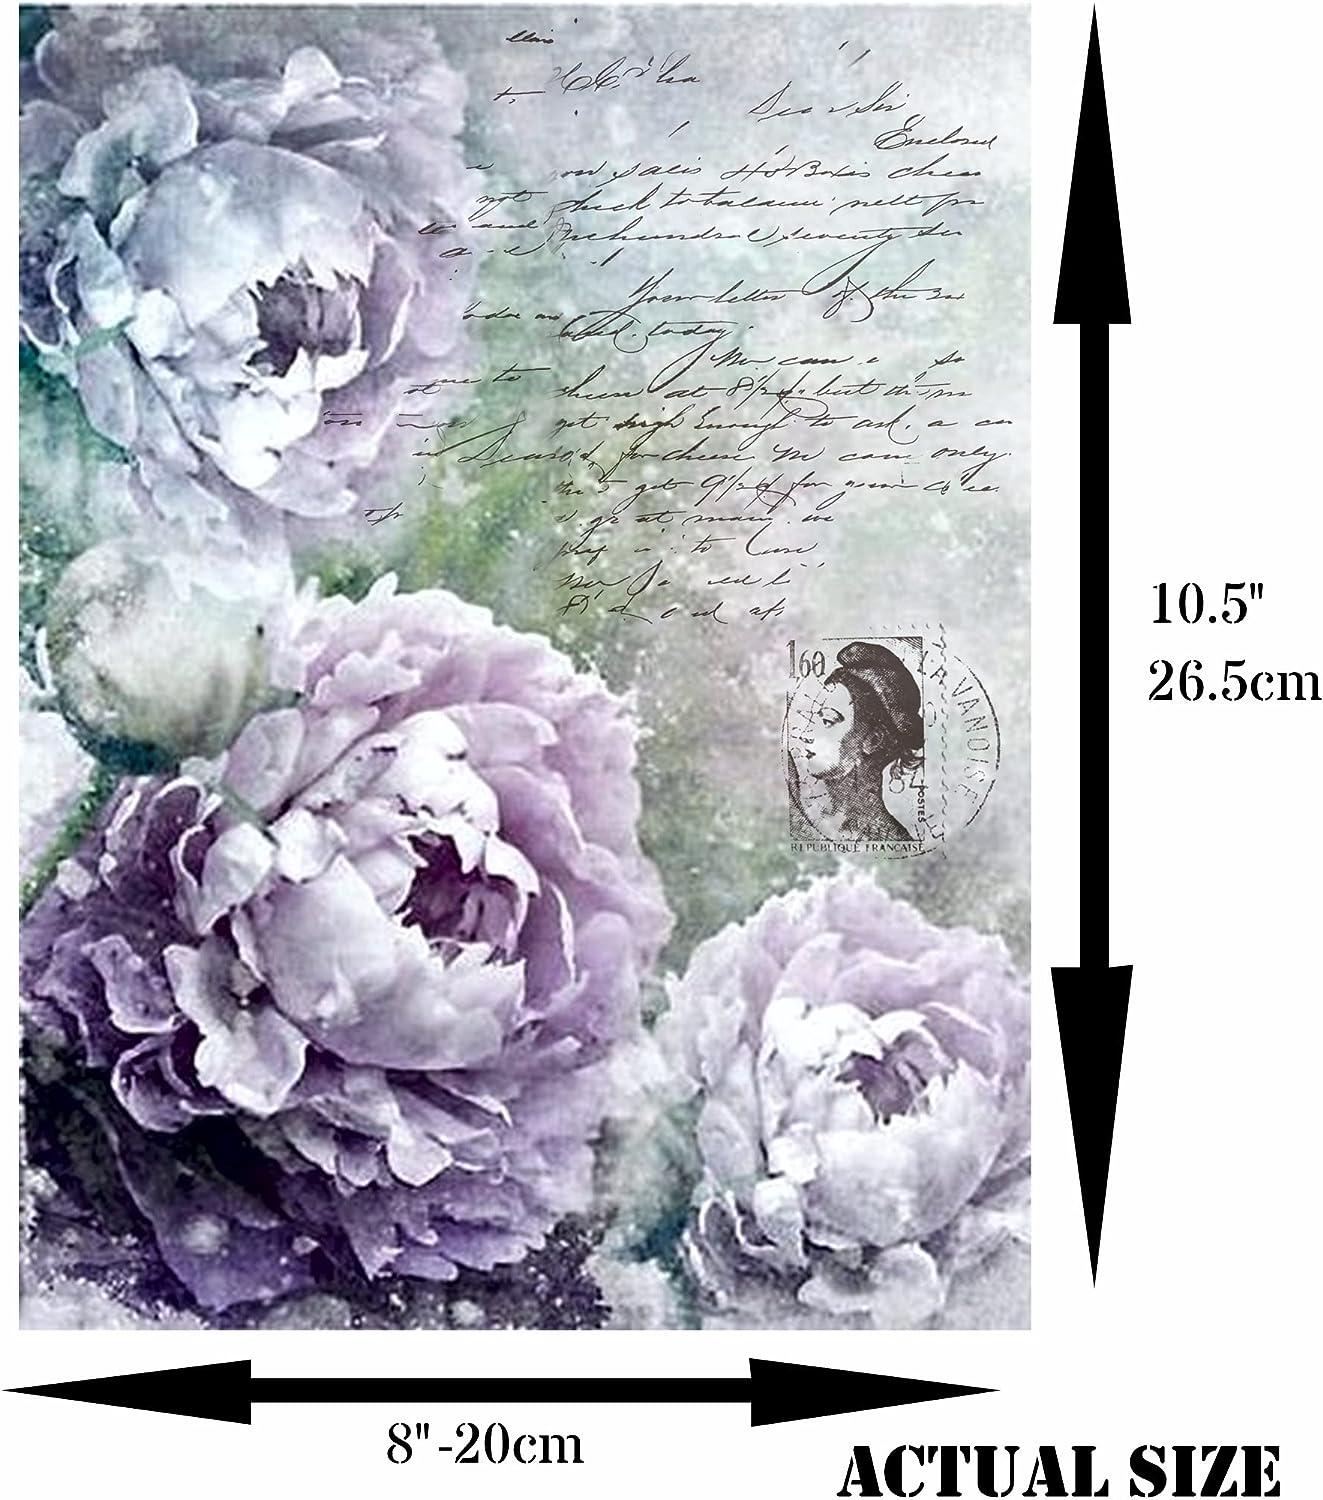 Woodland Theme Mulberry Rice Paper, 8 x 10.5 inch - 6 x Different Printed  Mulberry Paper Images 30gsm Visible Fibres for Decoupage Crafts Mixed Media